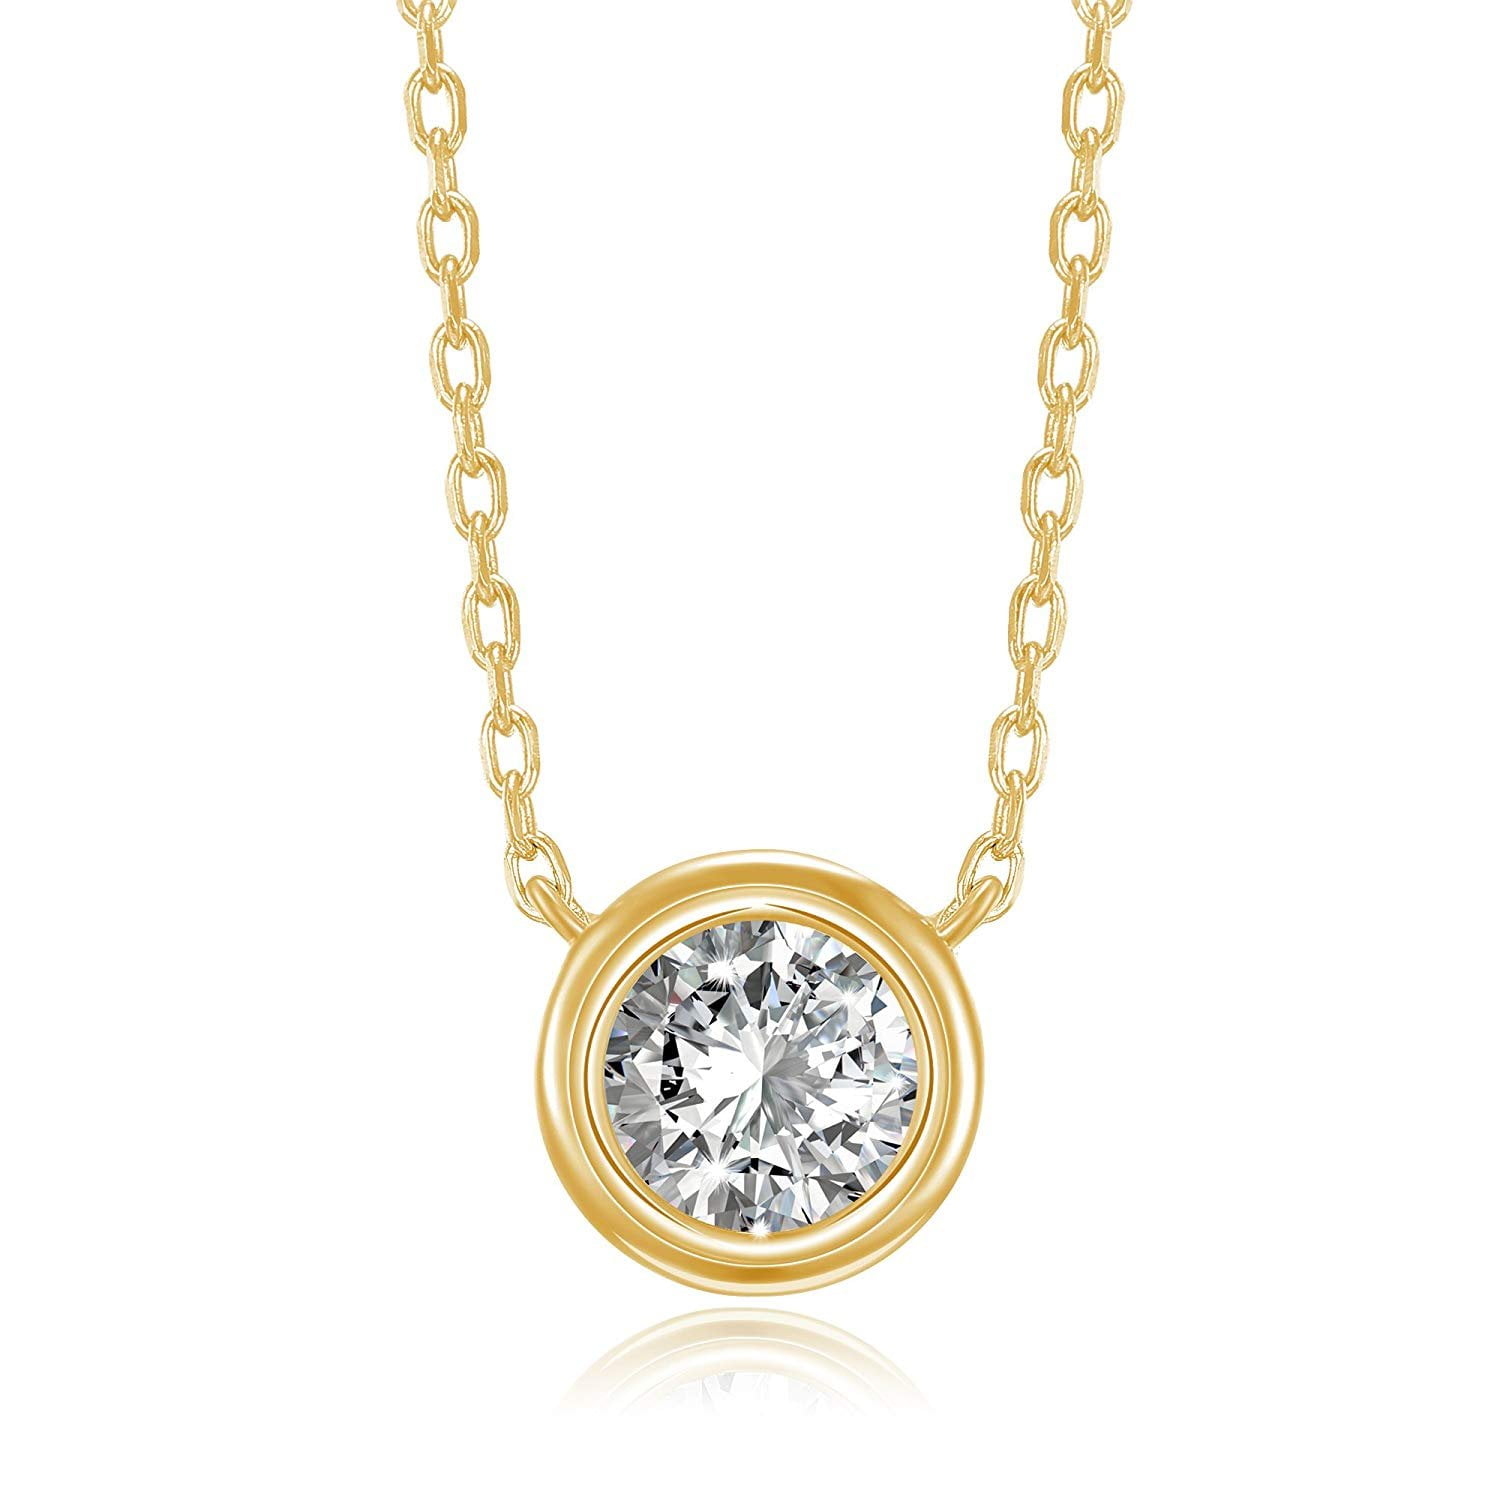 2Ct Bezel Solitaire Simulated Diamond Pendant Necklace 14K Yellow Gold Finish